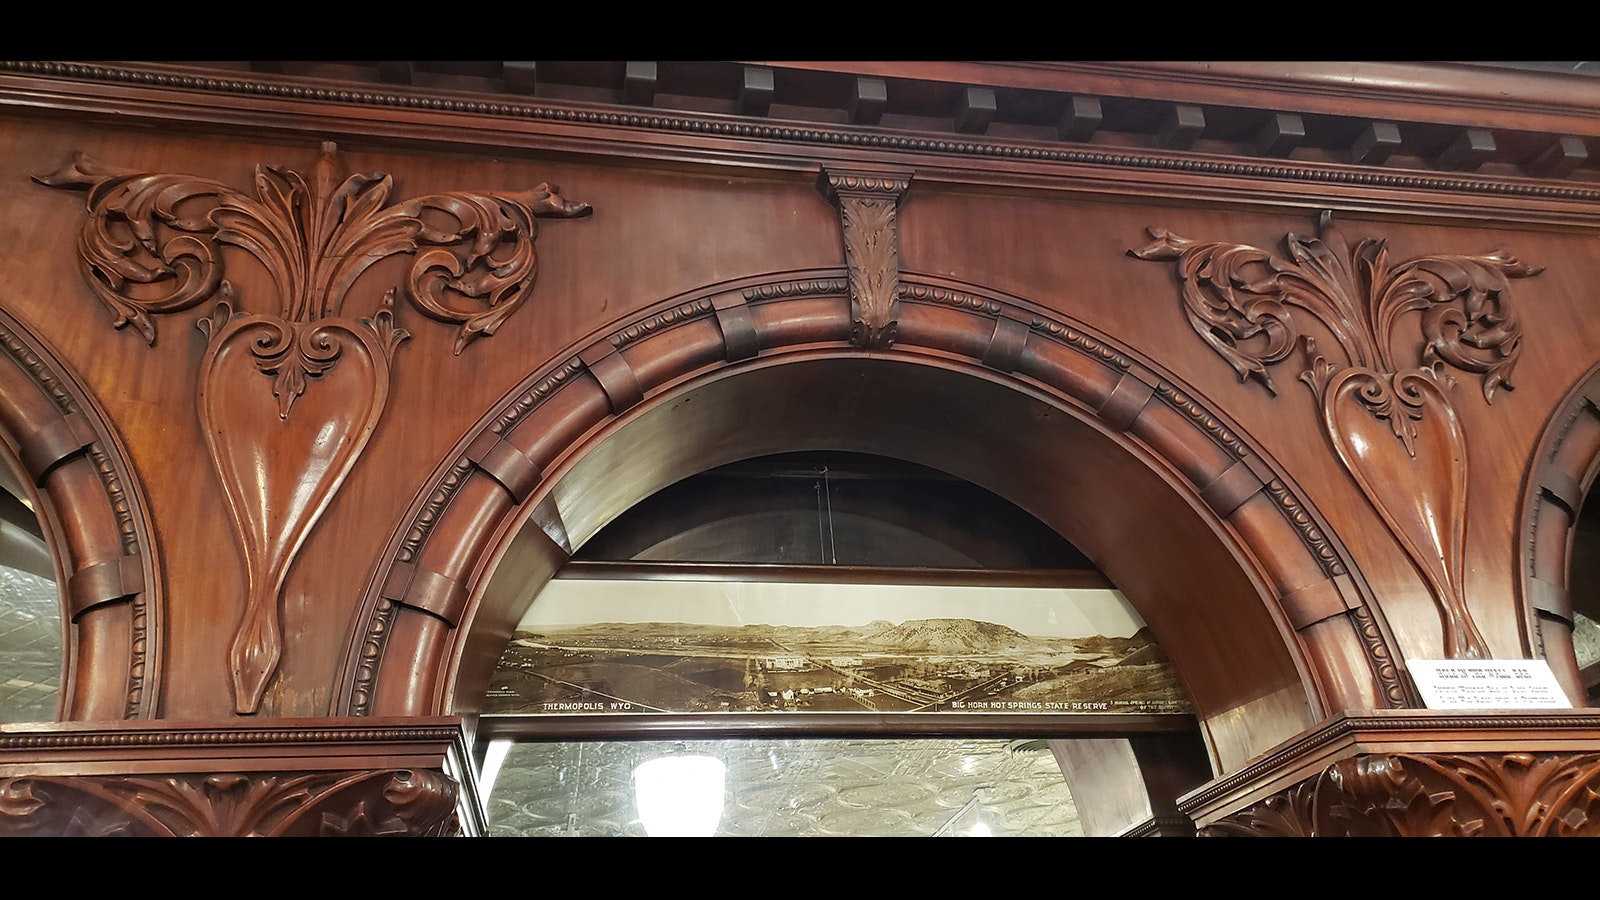 The carvings on the Hole in the Walls bar were done in Ireland on cherry wood harvested from New York.